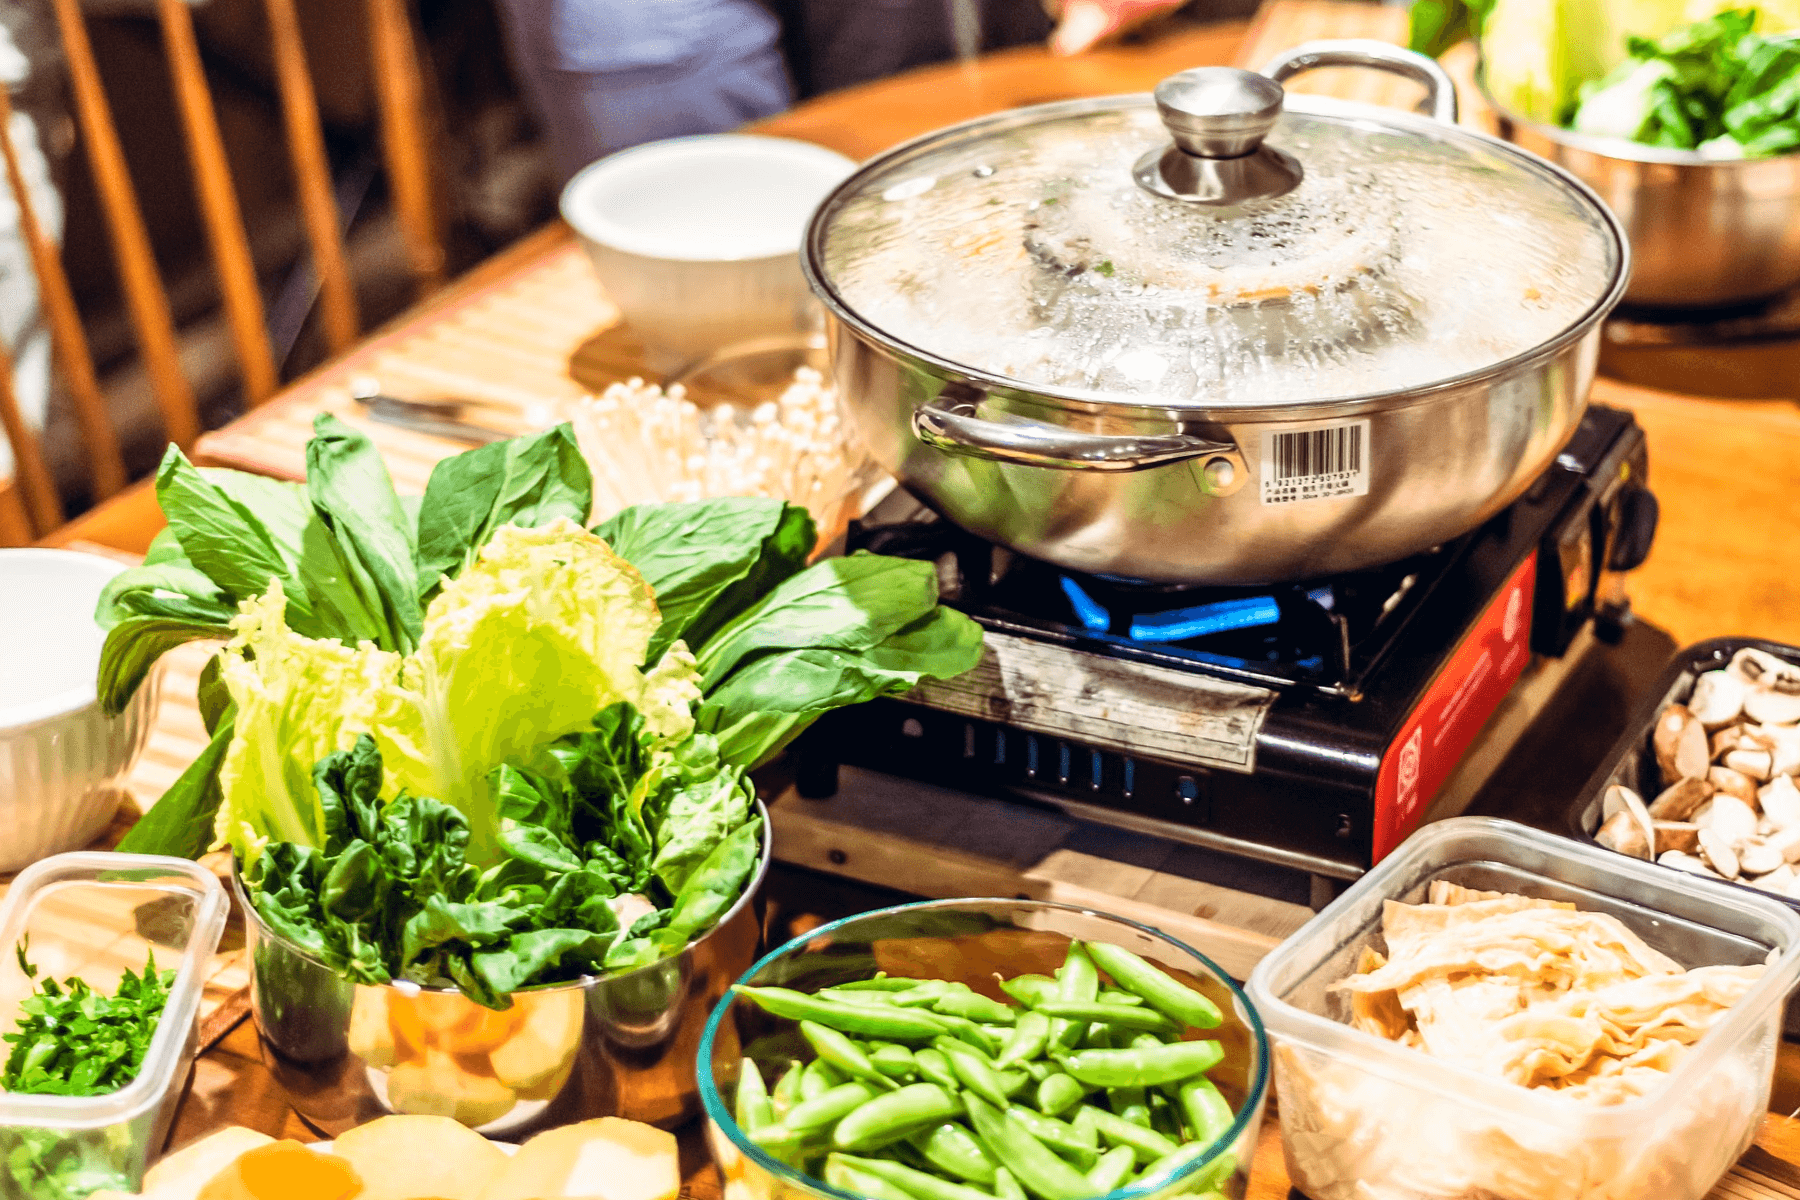 A hot pot spread with lots of vegetables in individual containers.